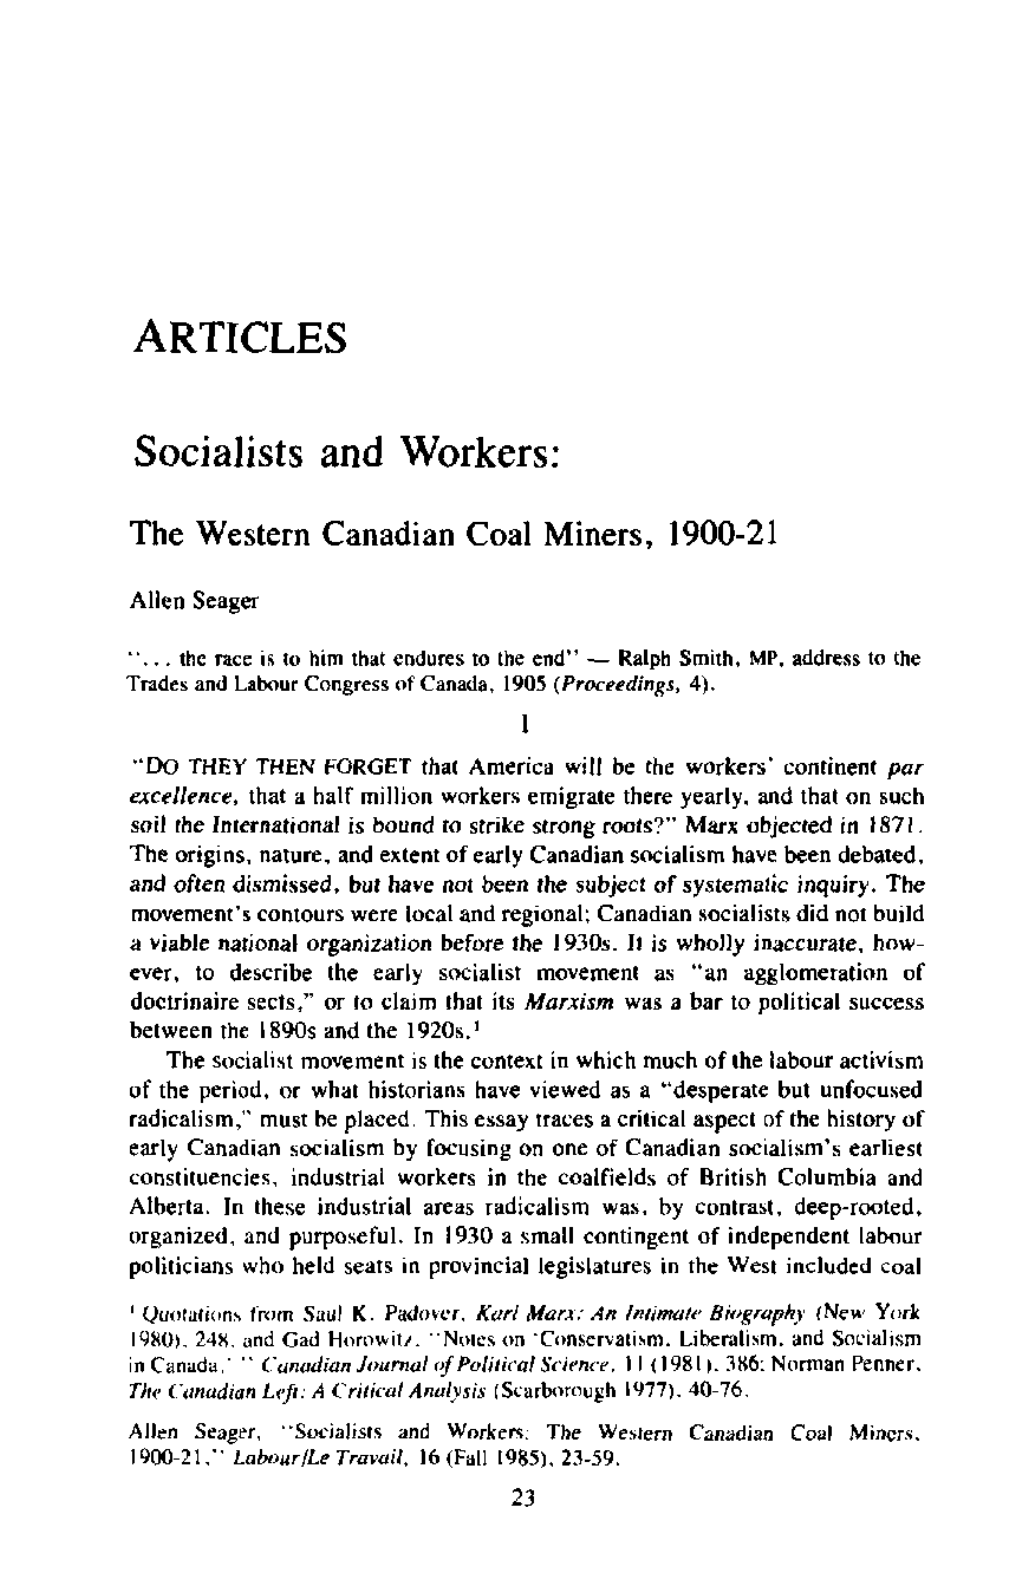 ARTICLES Socialists and Workers